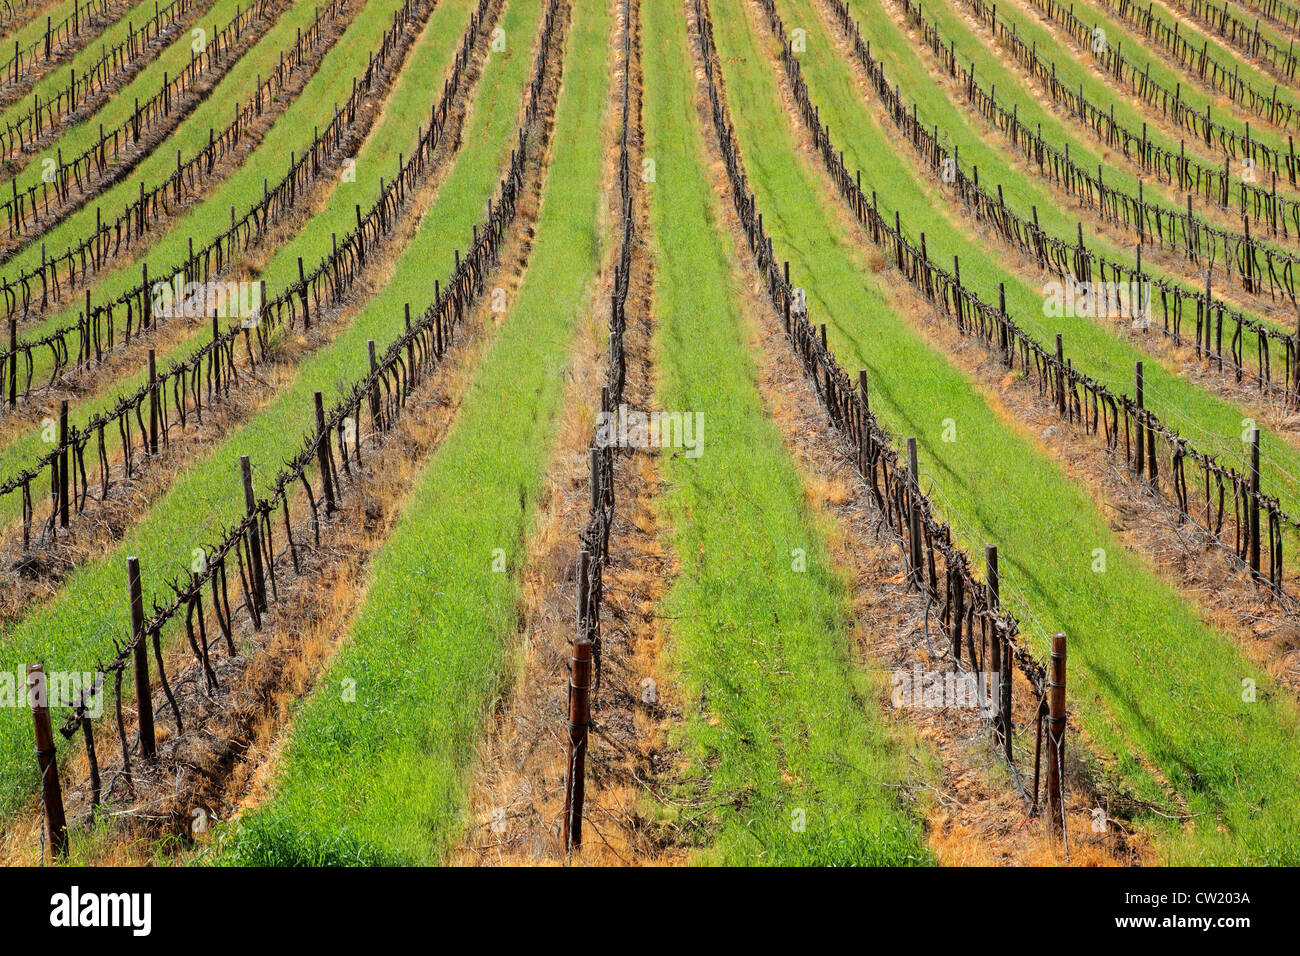 Symmetrical pattern of vines and green grass of a vineyard, Cape Town area, South Africa Stock Photo